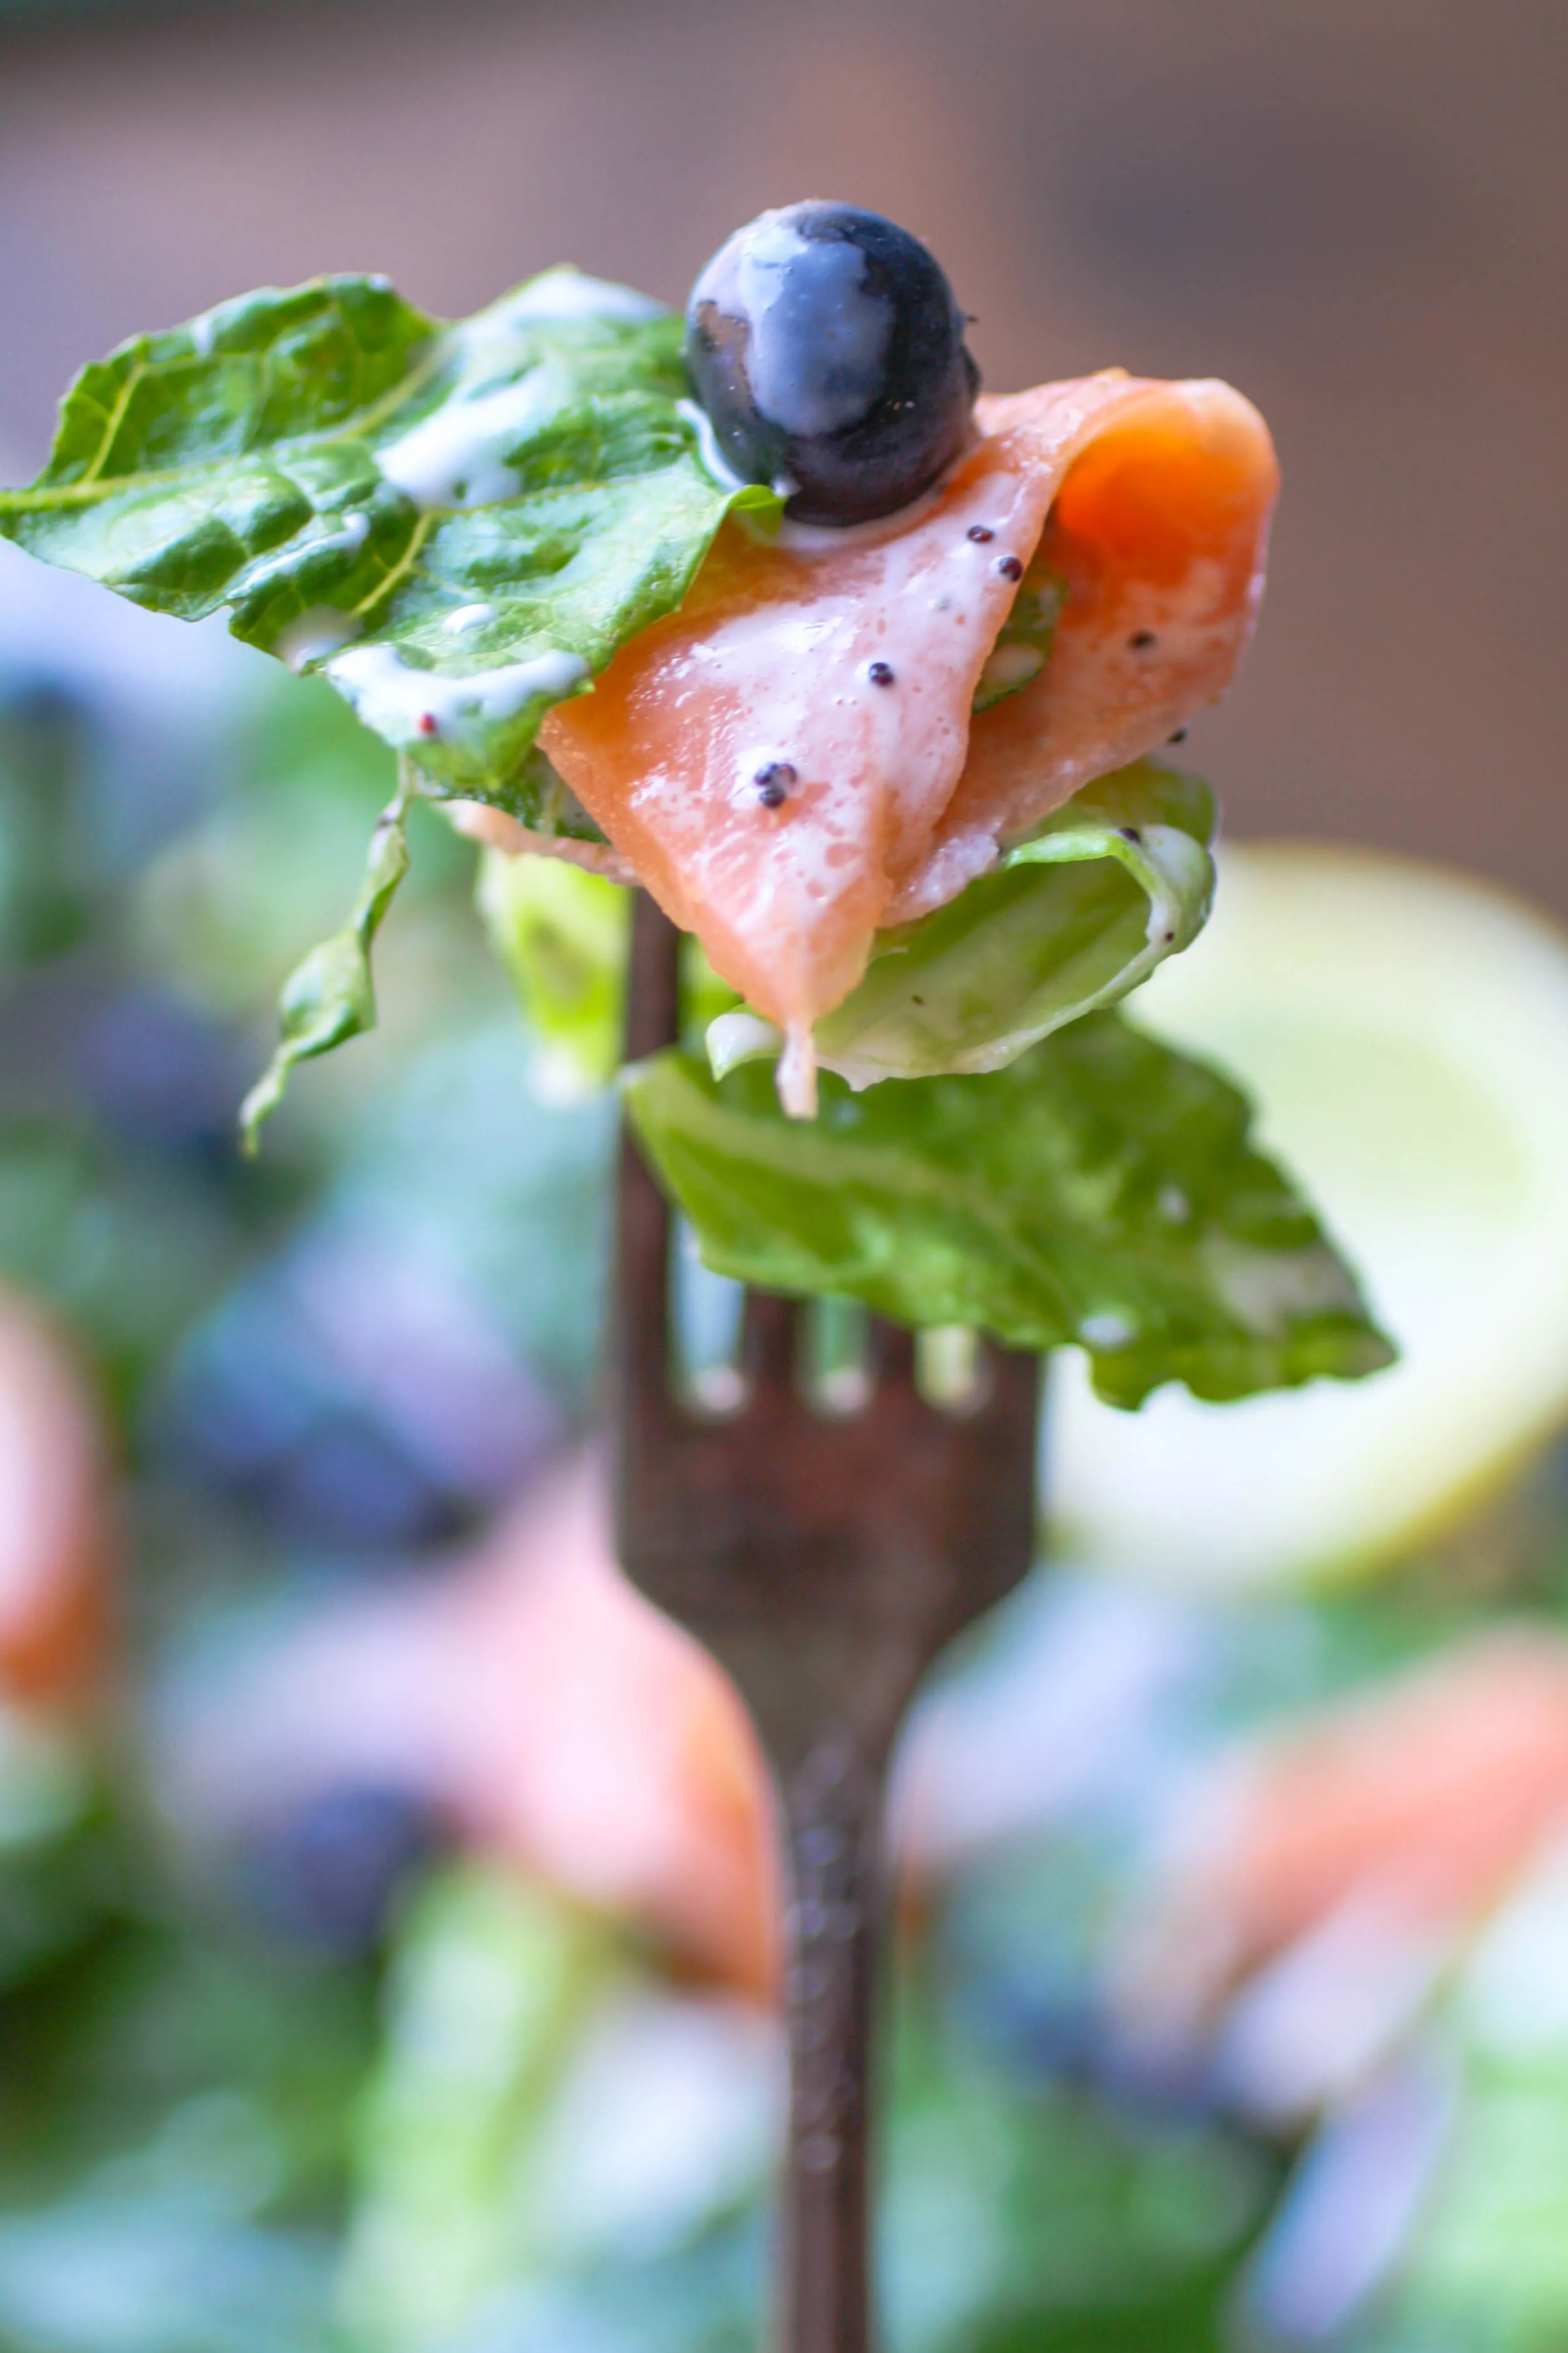 Smoked Salmon Salad with Blueberries and Lemon Poppy Seed Dressing is a delicious summer meal. Each forkful offers delicious flavor!